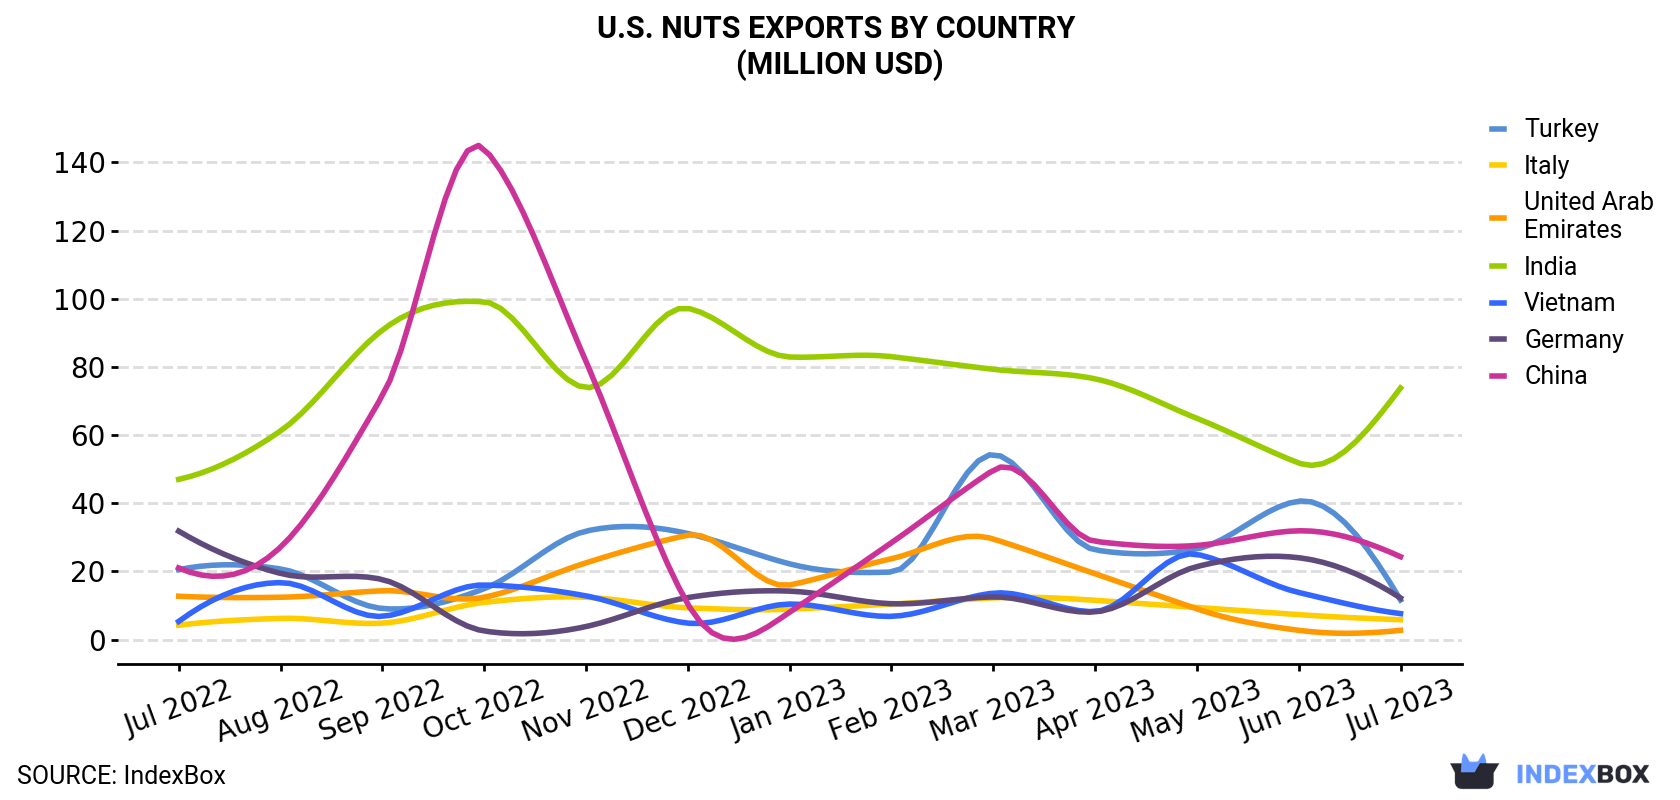 U.S. Nuts Exports By Country (Million USD)